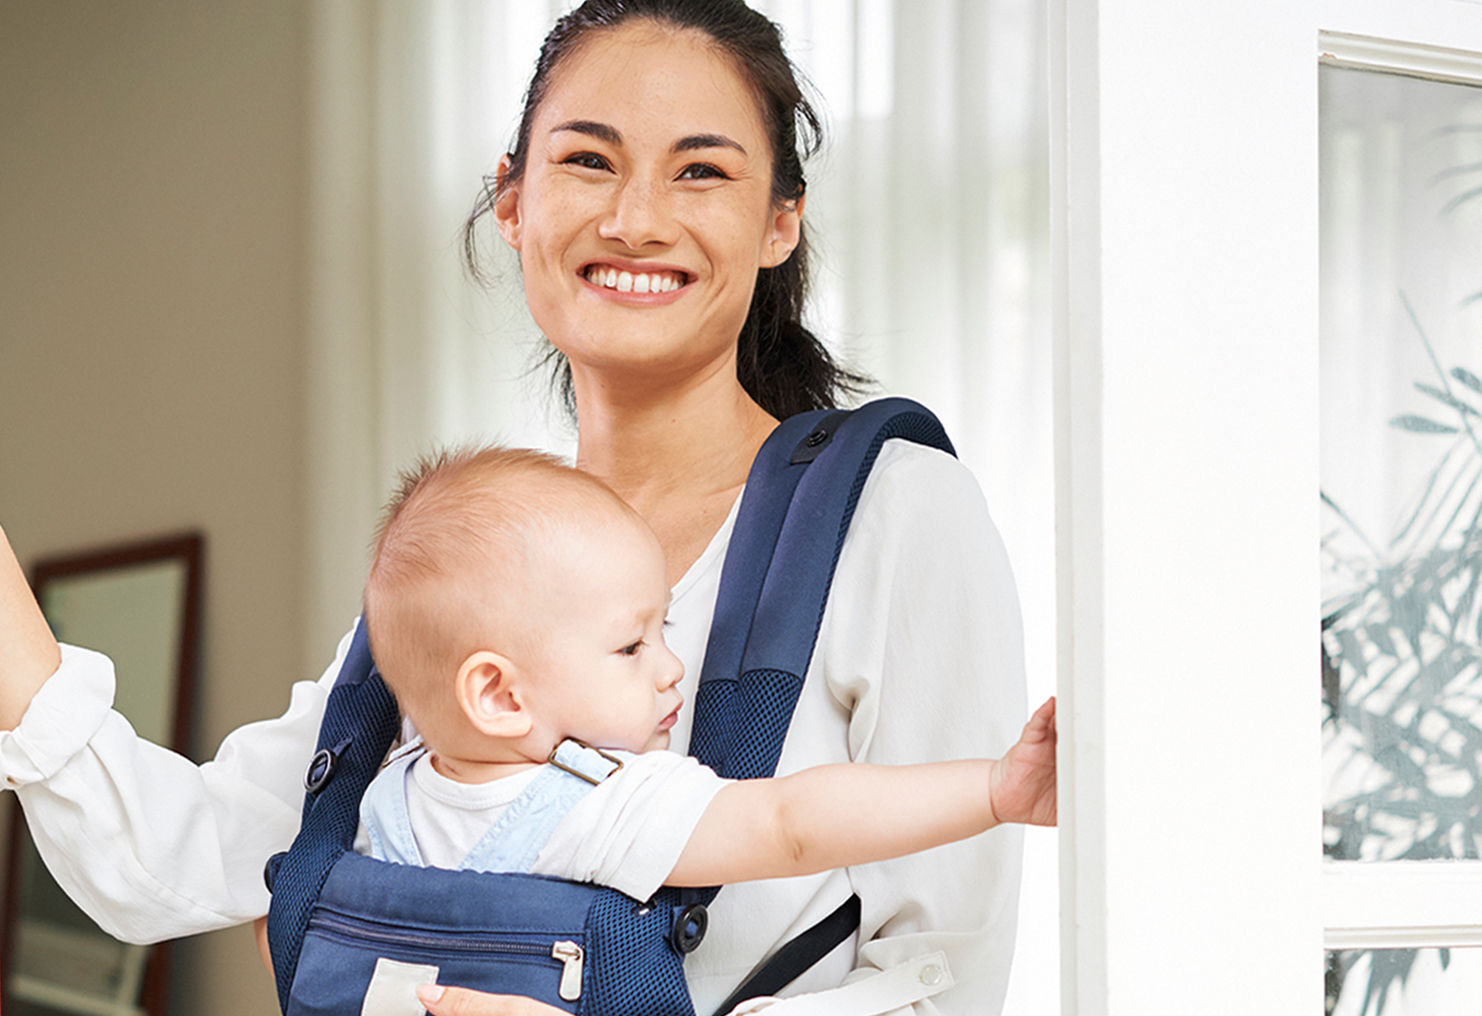 A woman is carrying a baby in a carrier.